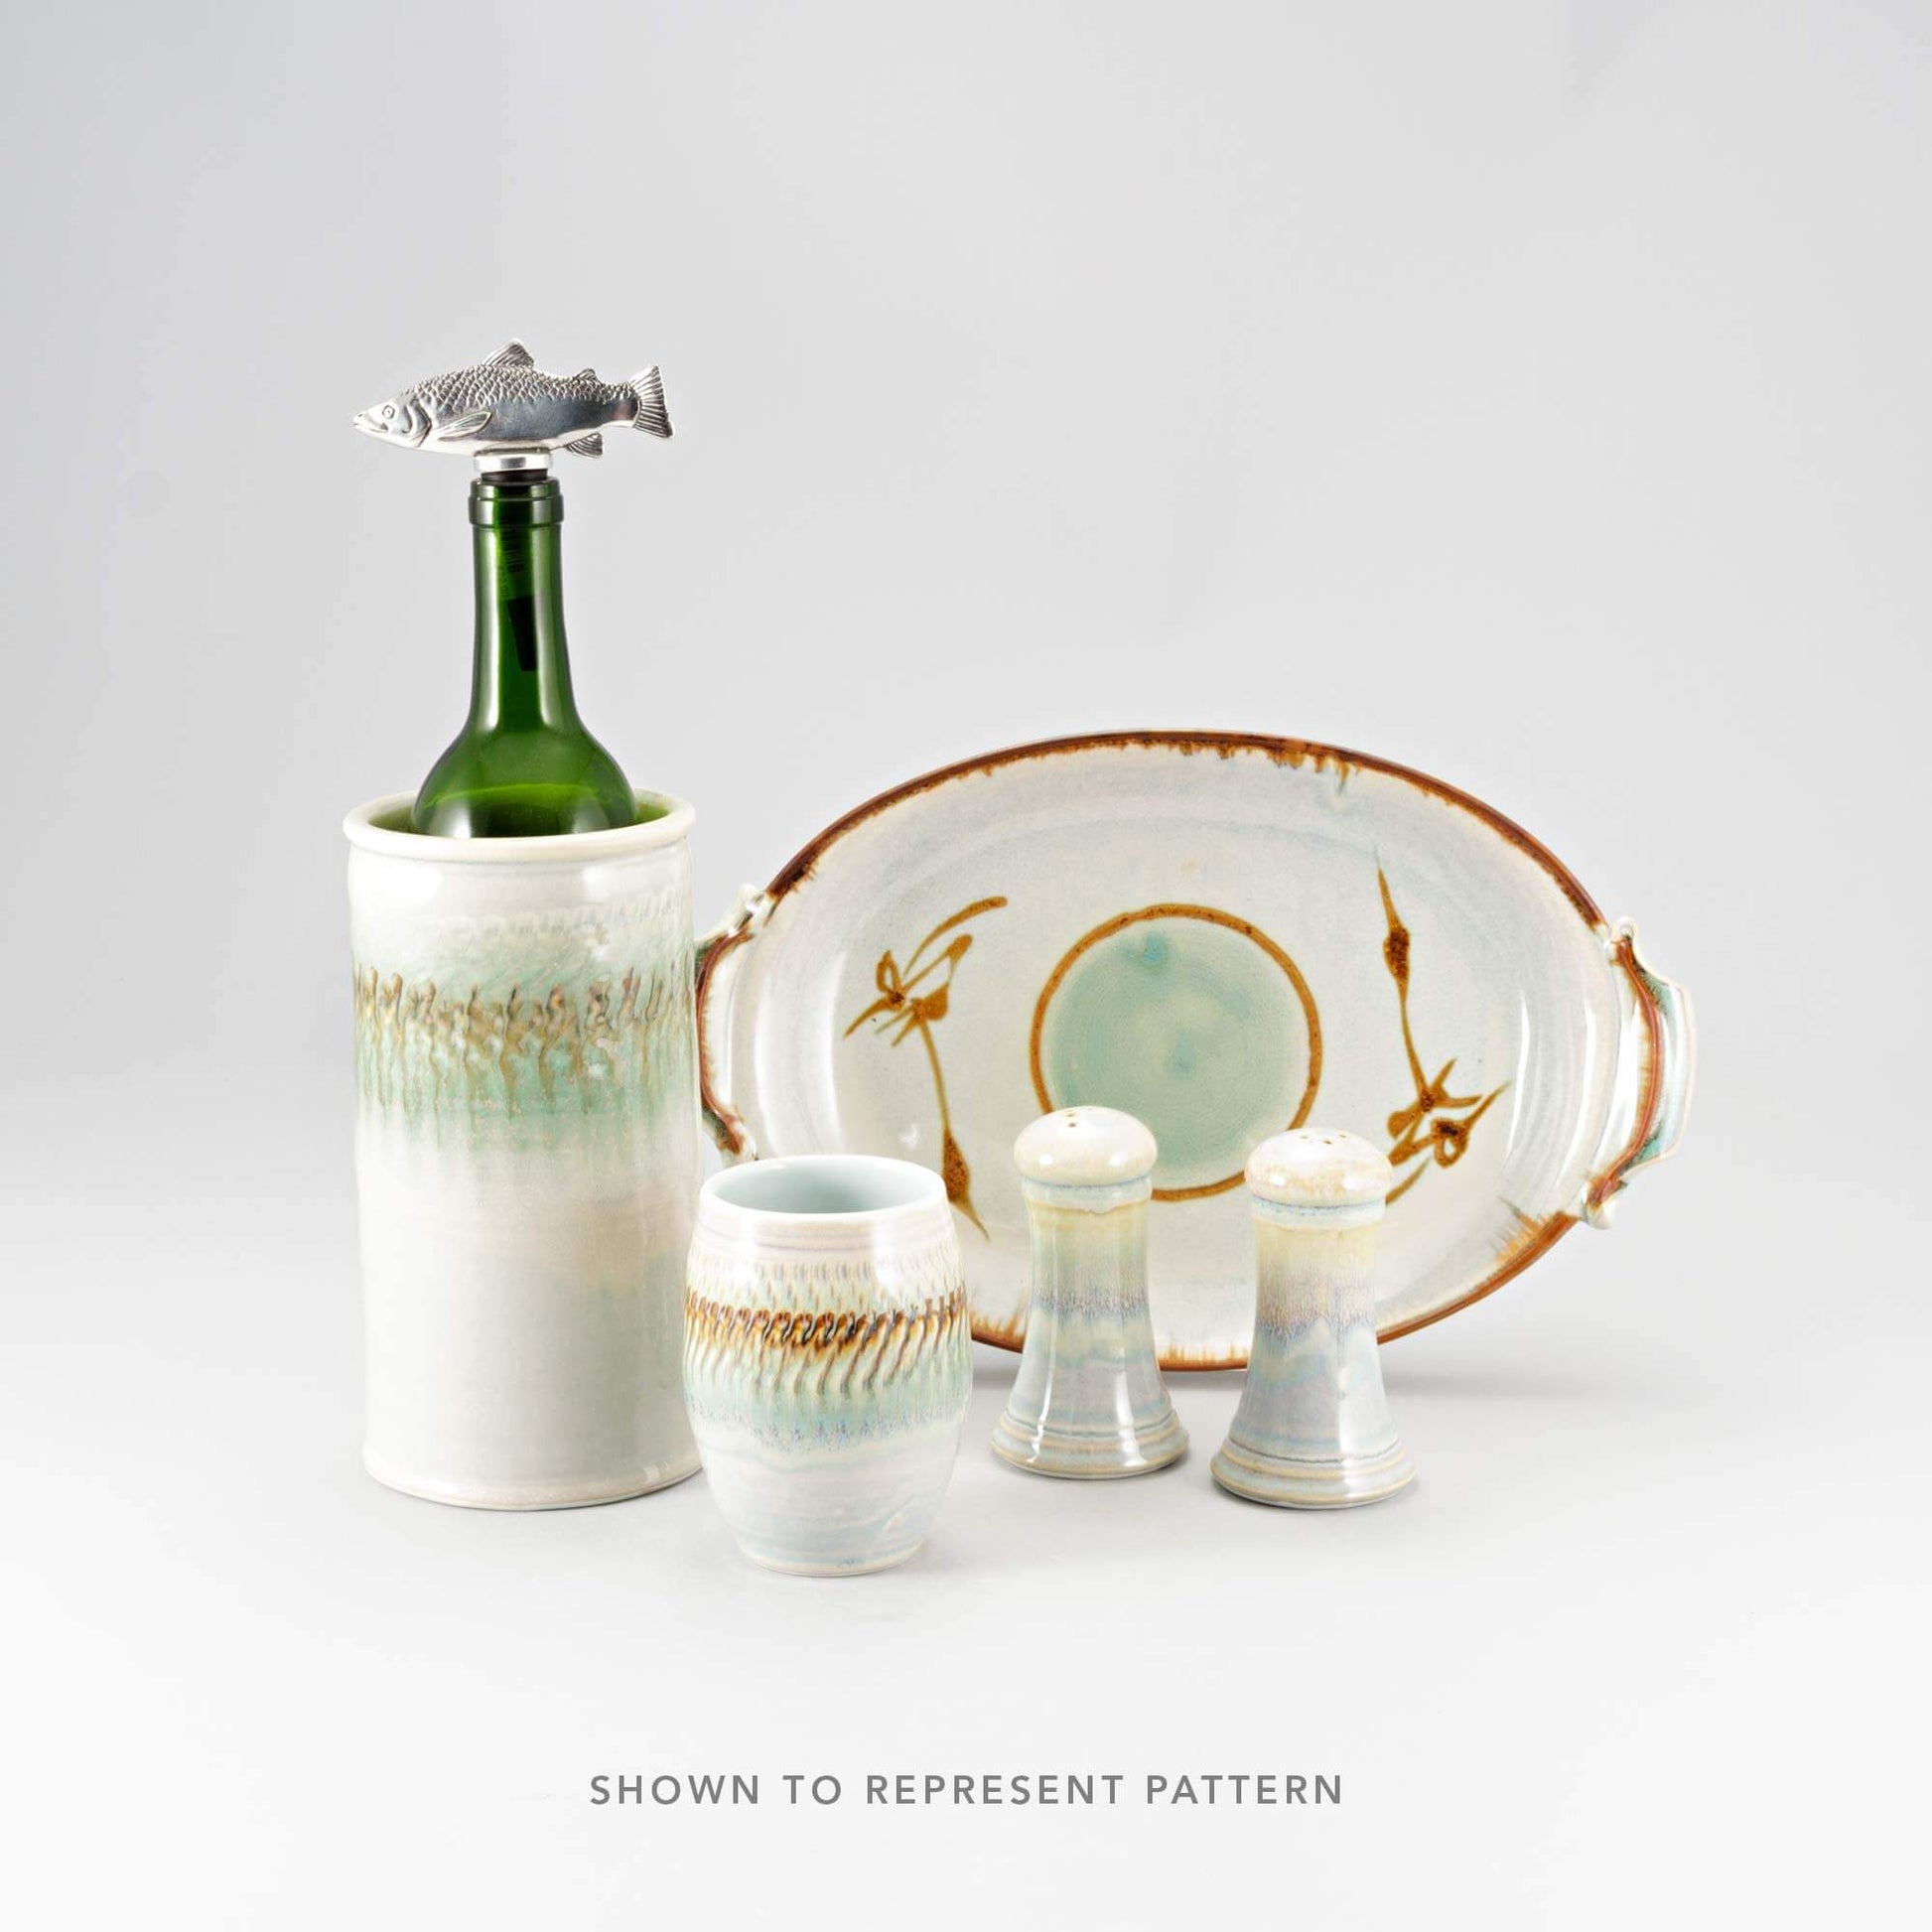 Handmade Pottery Brie Baker in Ivory & Green pattern made by Georgetown Pottery in Maine